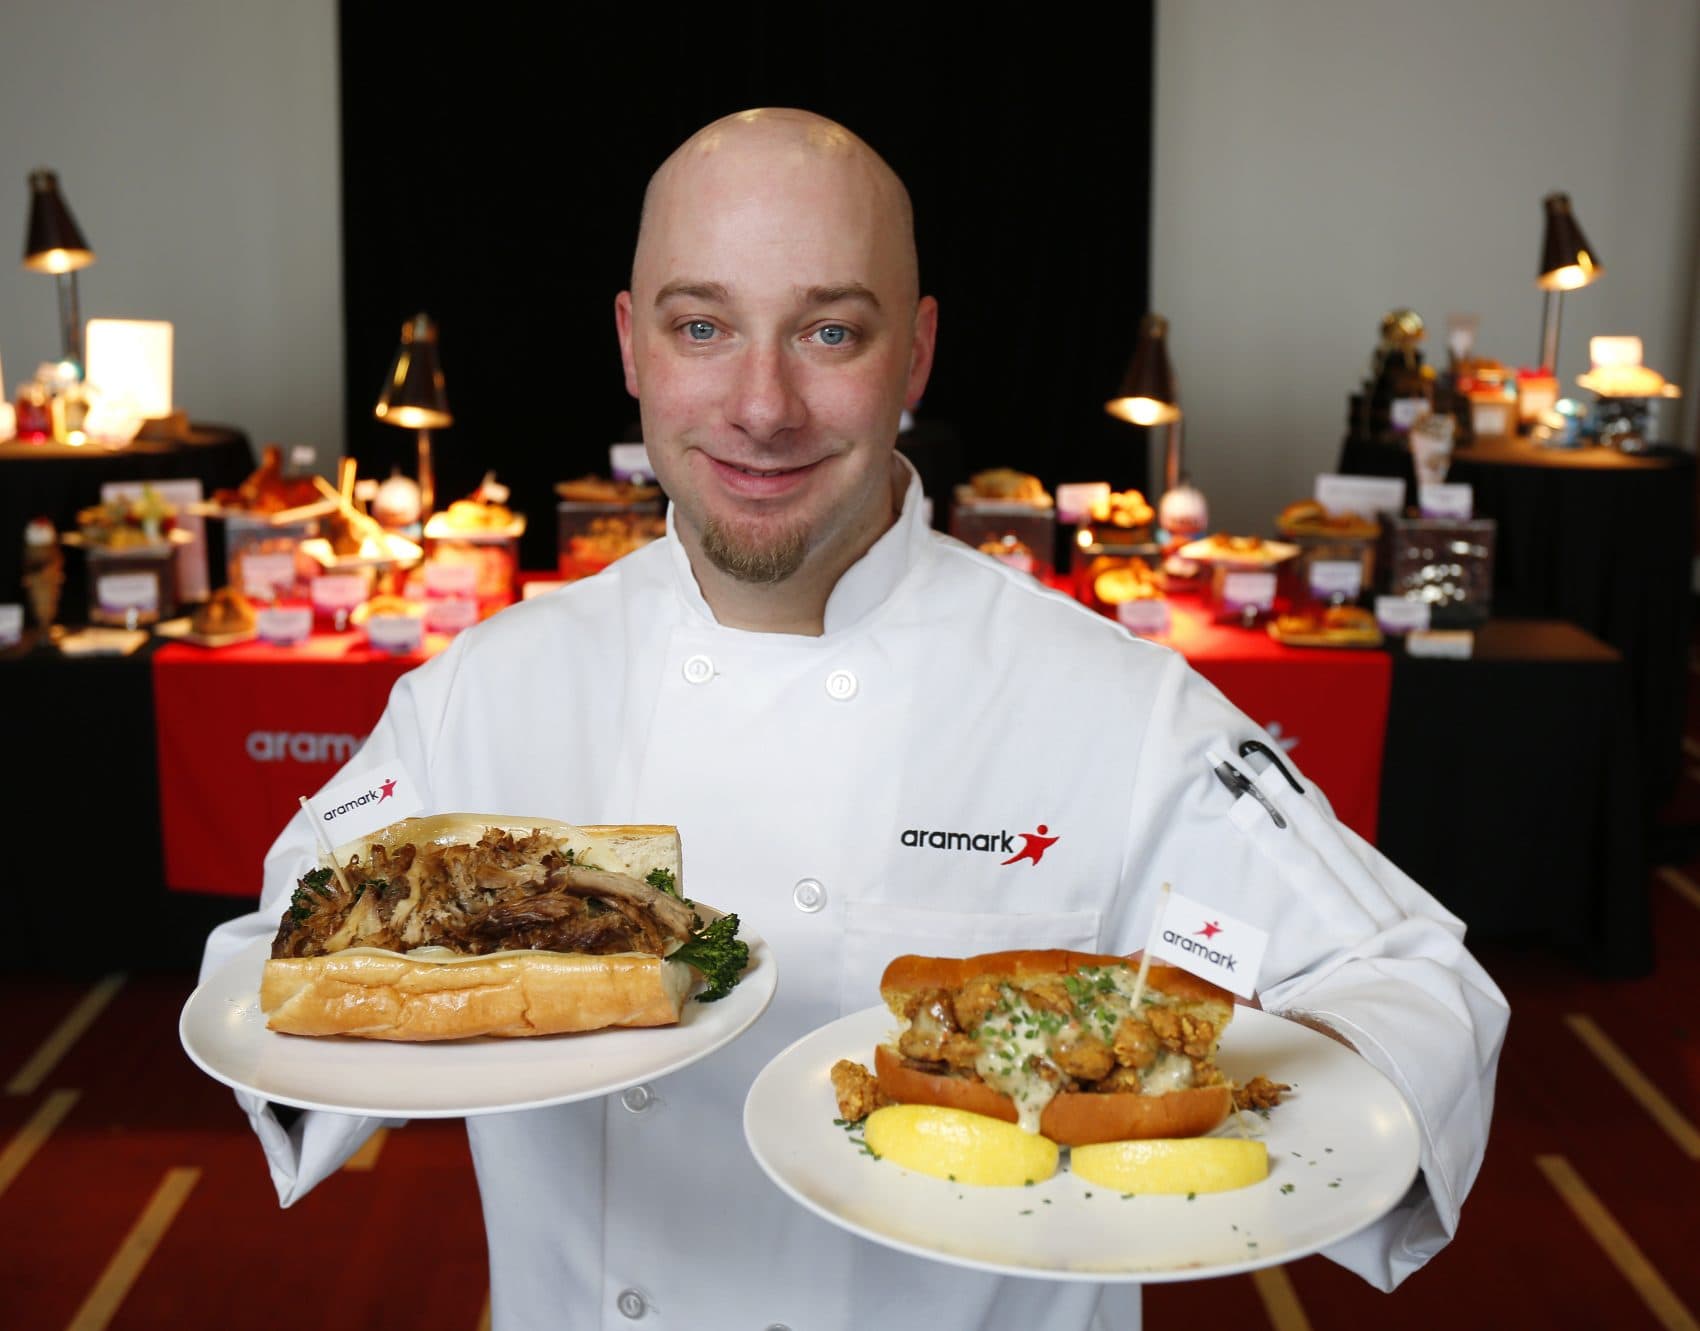 Aramark Senior Executive at U.S. Bank Stadium Chef James Mehne holds signature sandwiches he created for Super Bowl LII celebrating hometown flavors of the Philadelphia Eagles, left, and New England Patriots, right, at the Super Bowl menu preview in Minneapolis. (Andy Clayton-King/AP for Aramark)